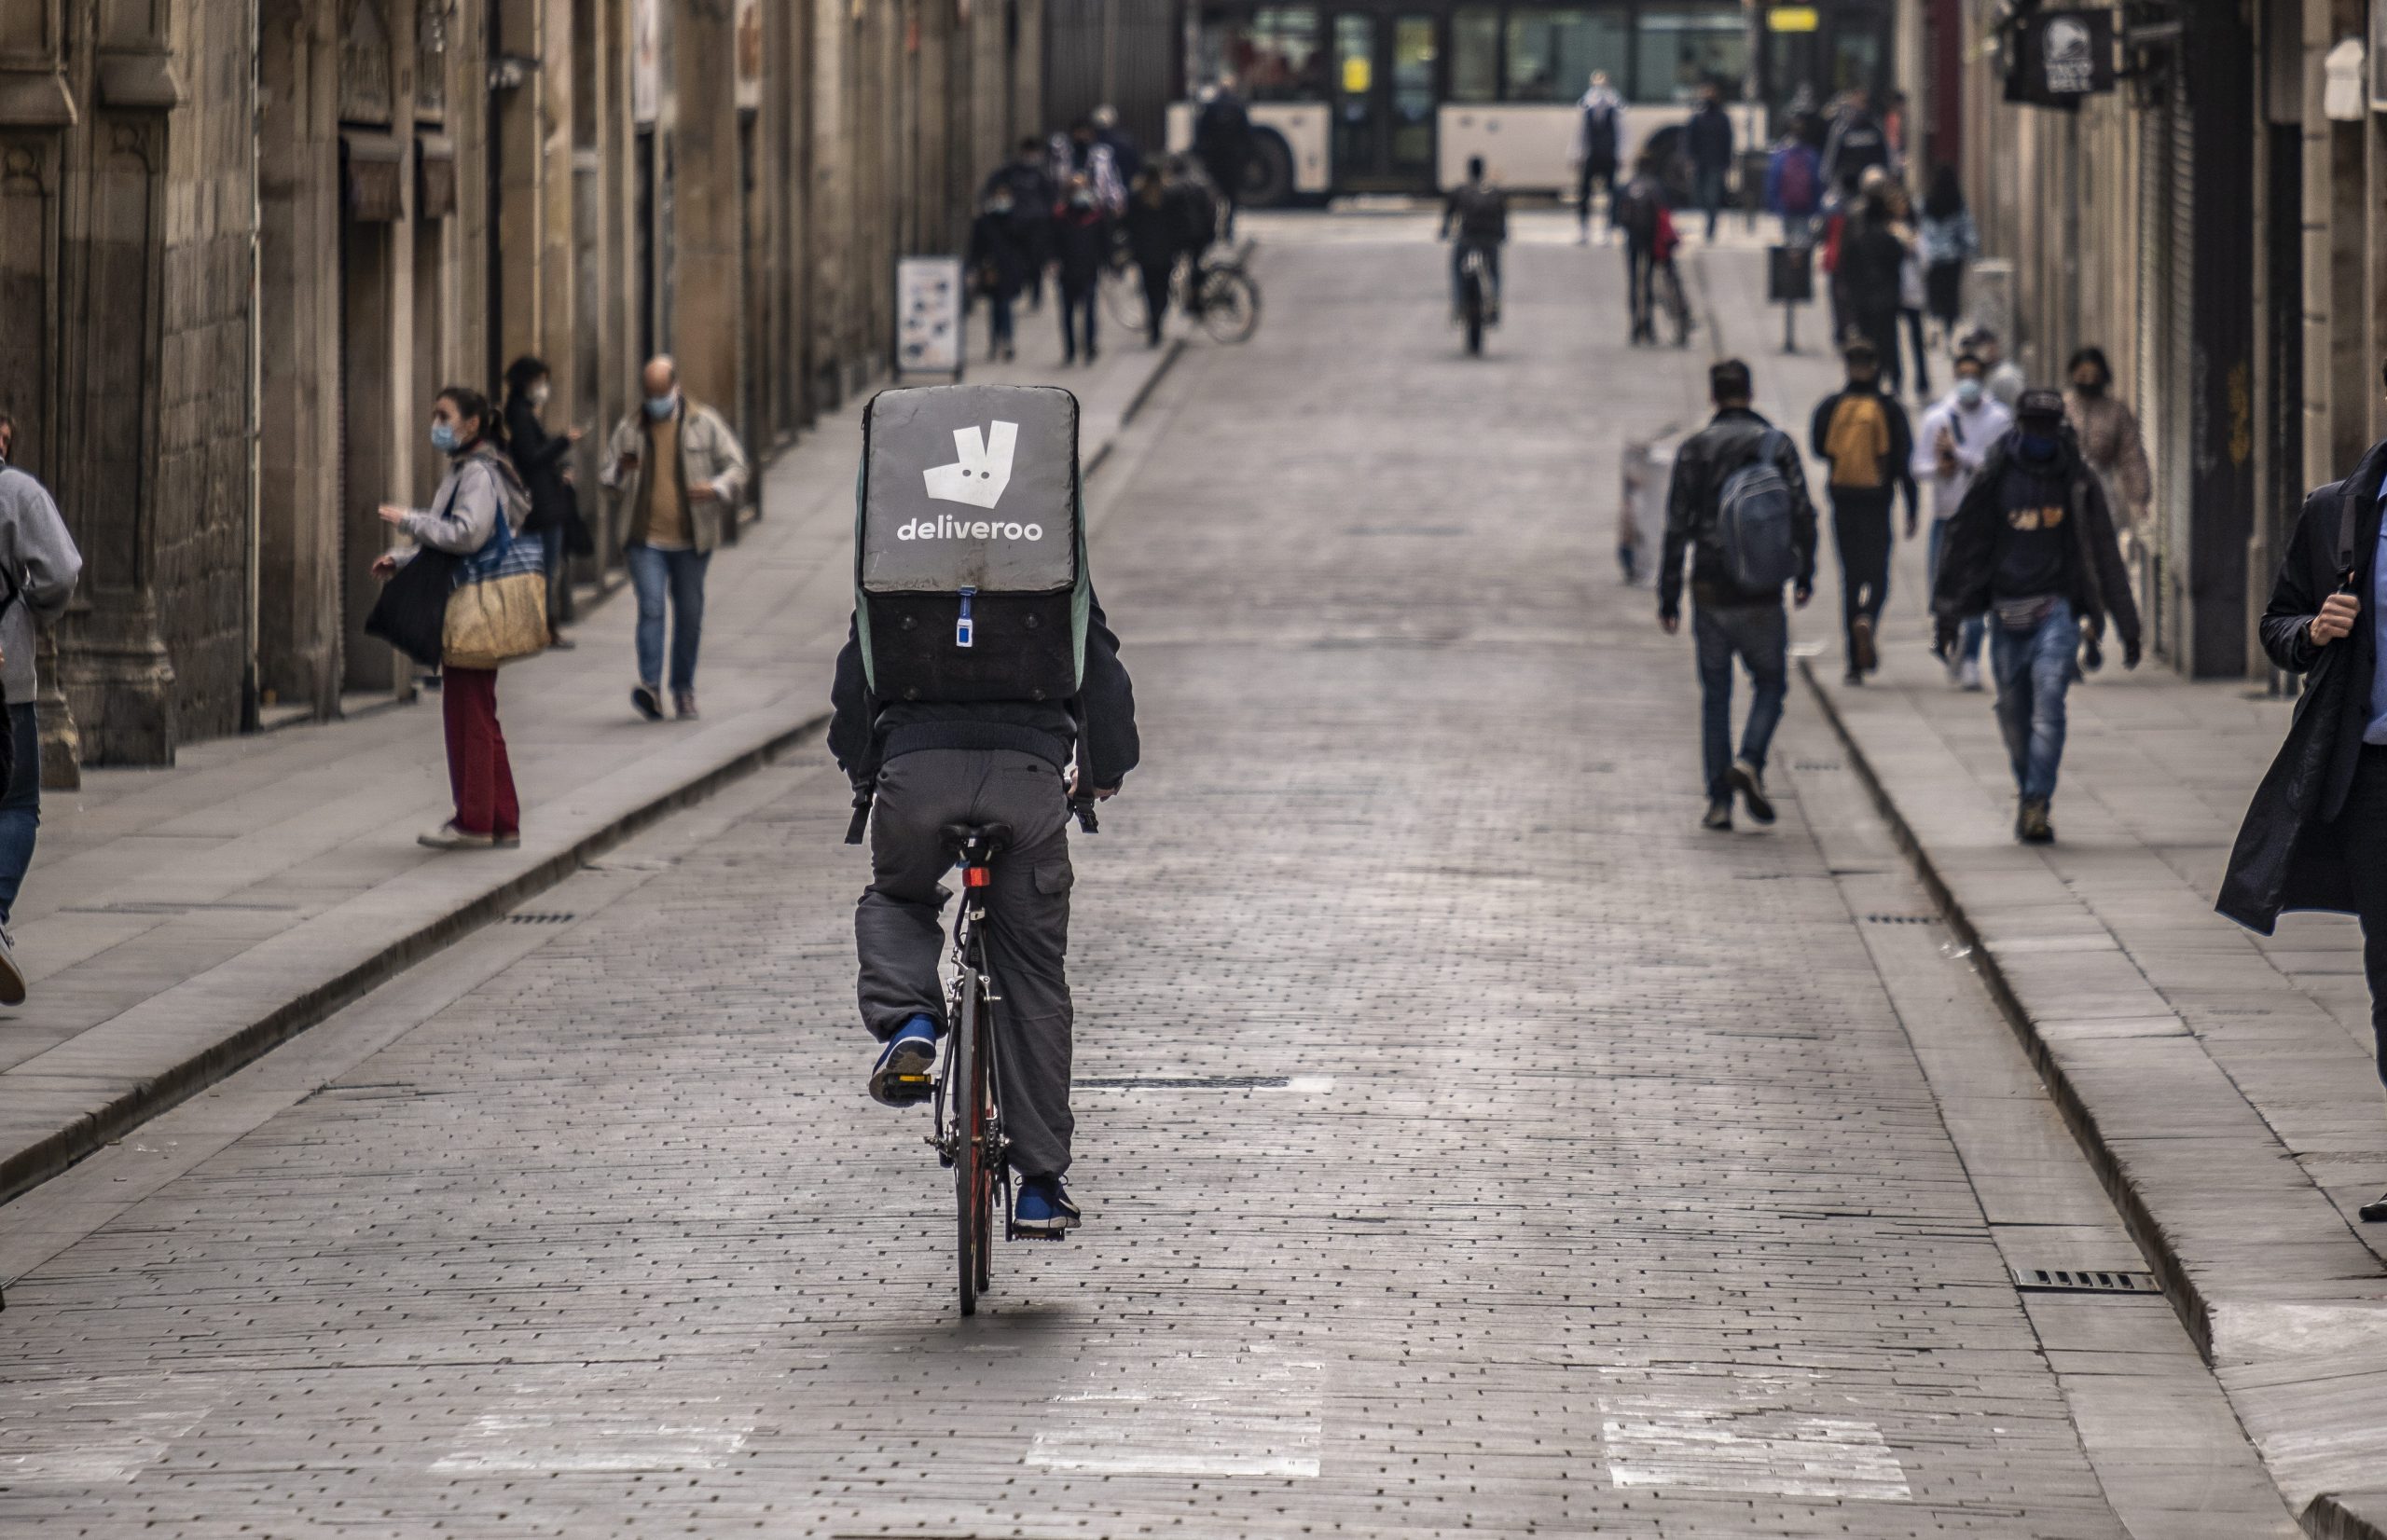 Deliveroo is quitting Spain as new delivery employee rules start soon